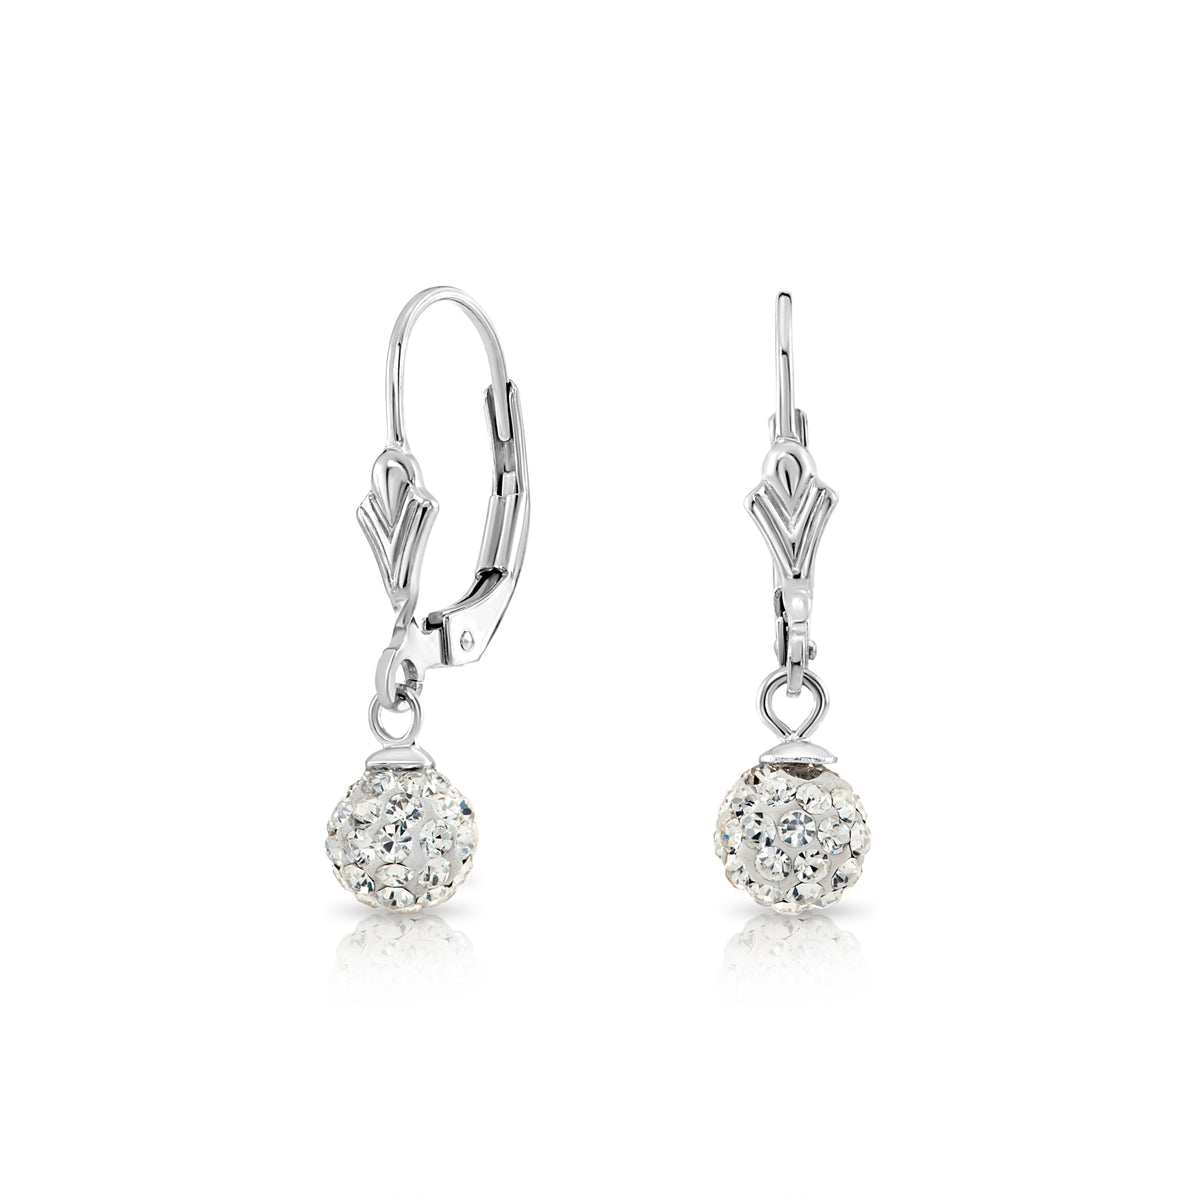 CZ Crystal Ball French-back Earrings in 10mm